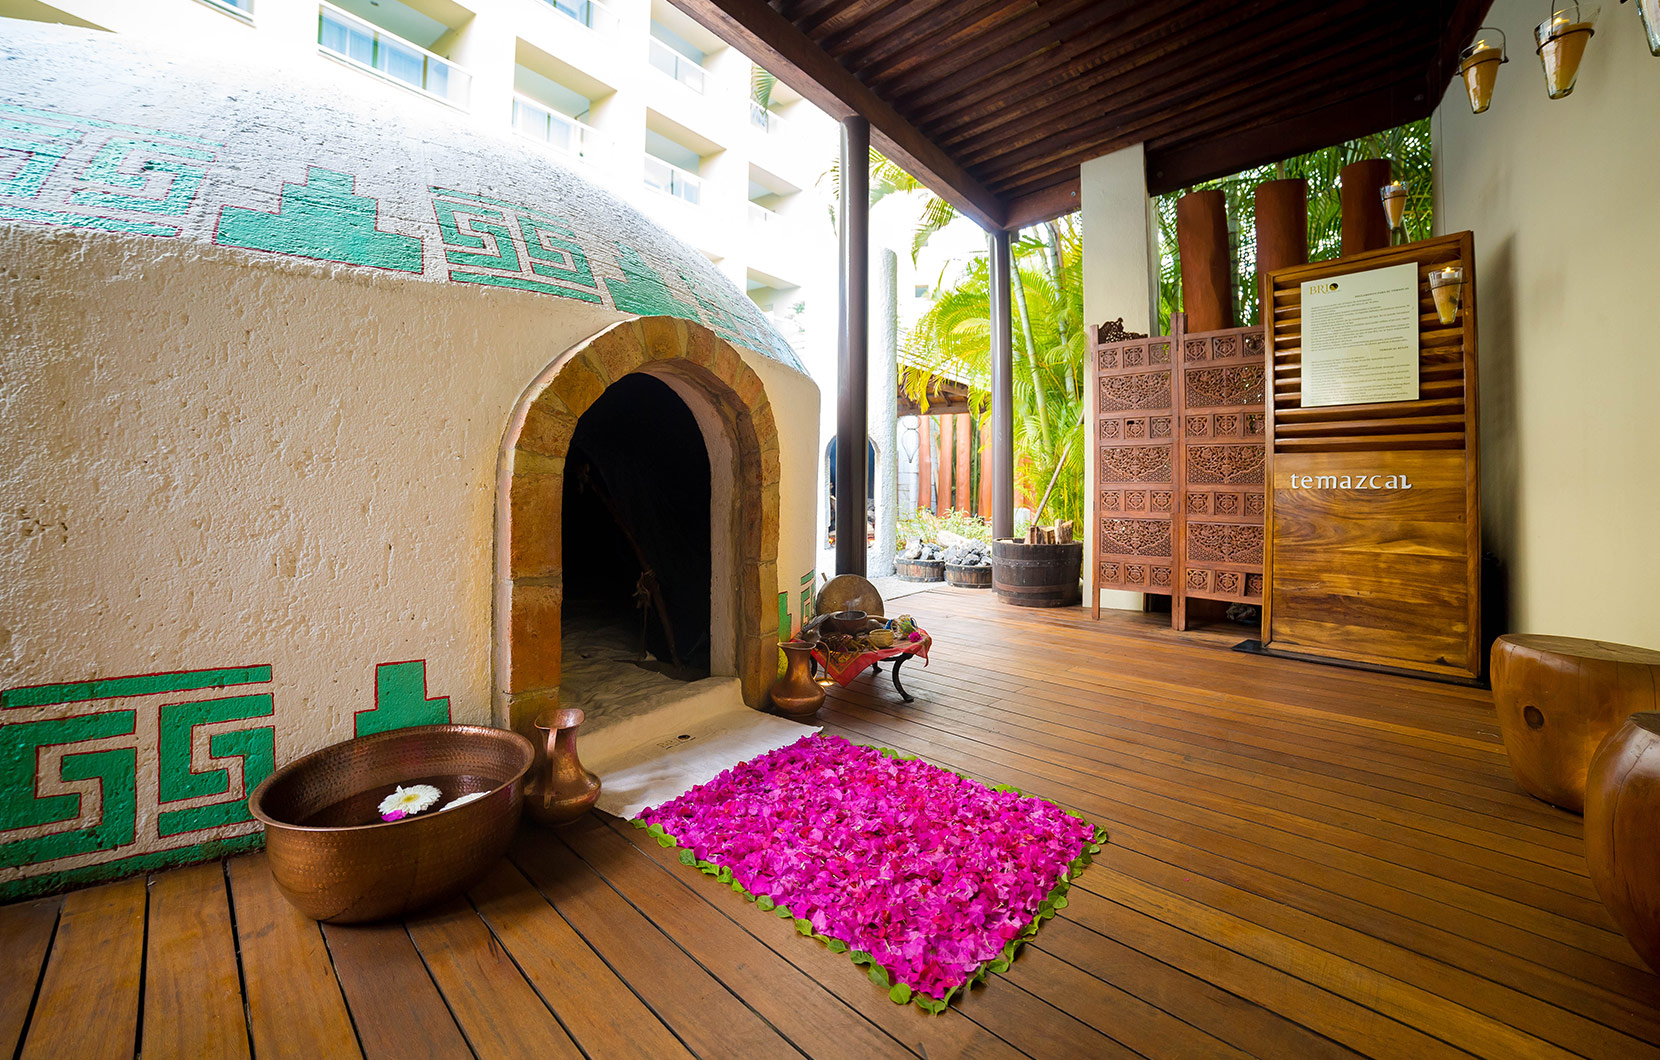 The Temazcal at Vidanta Nuevo Vallarta allows vacationers to experience traditions of authentic ancient Mexico.